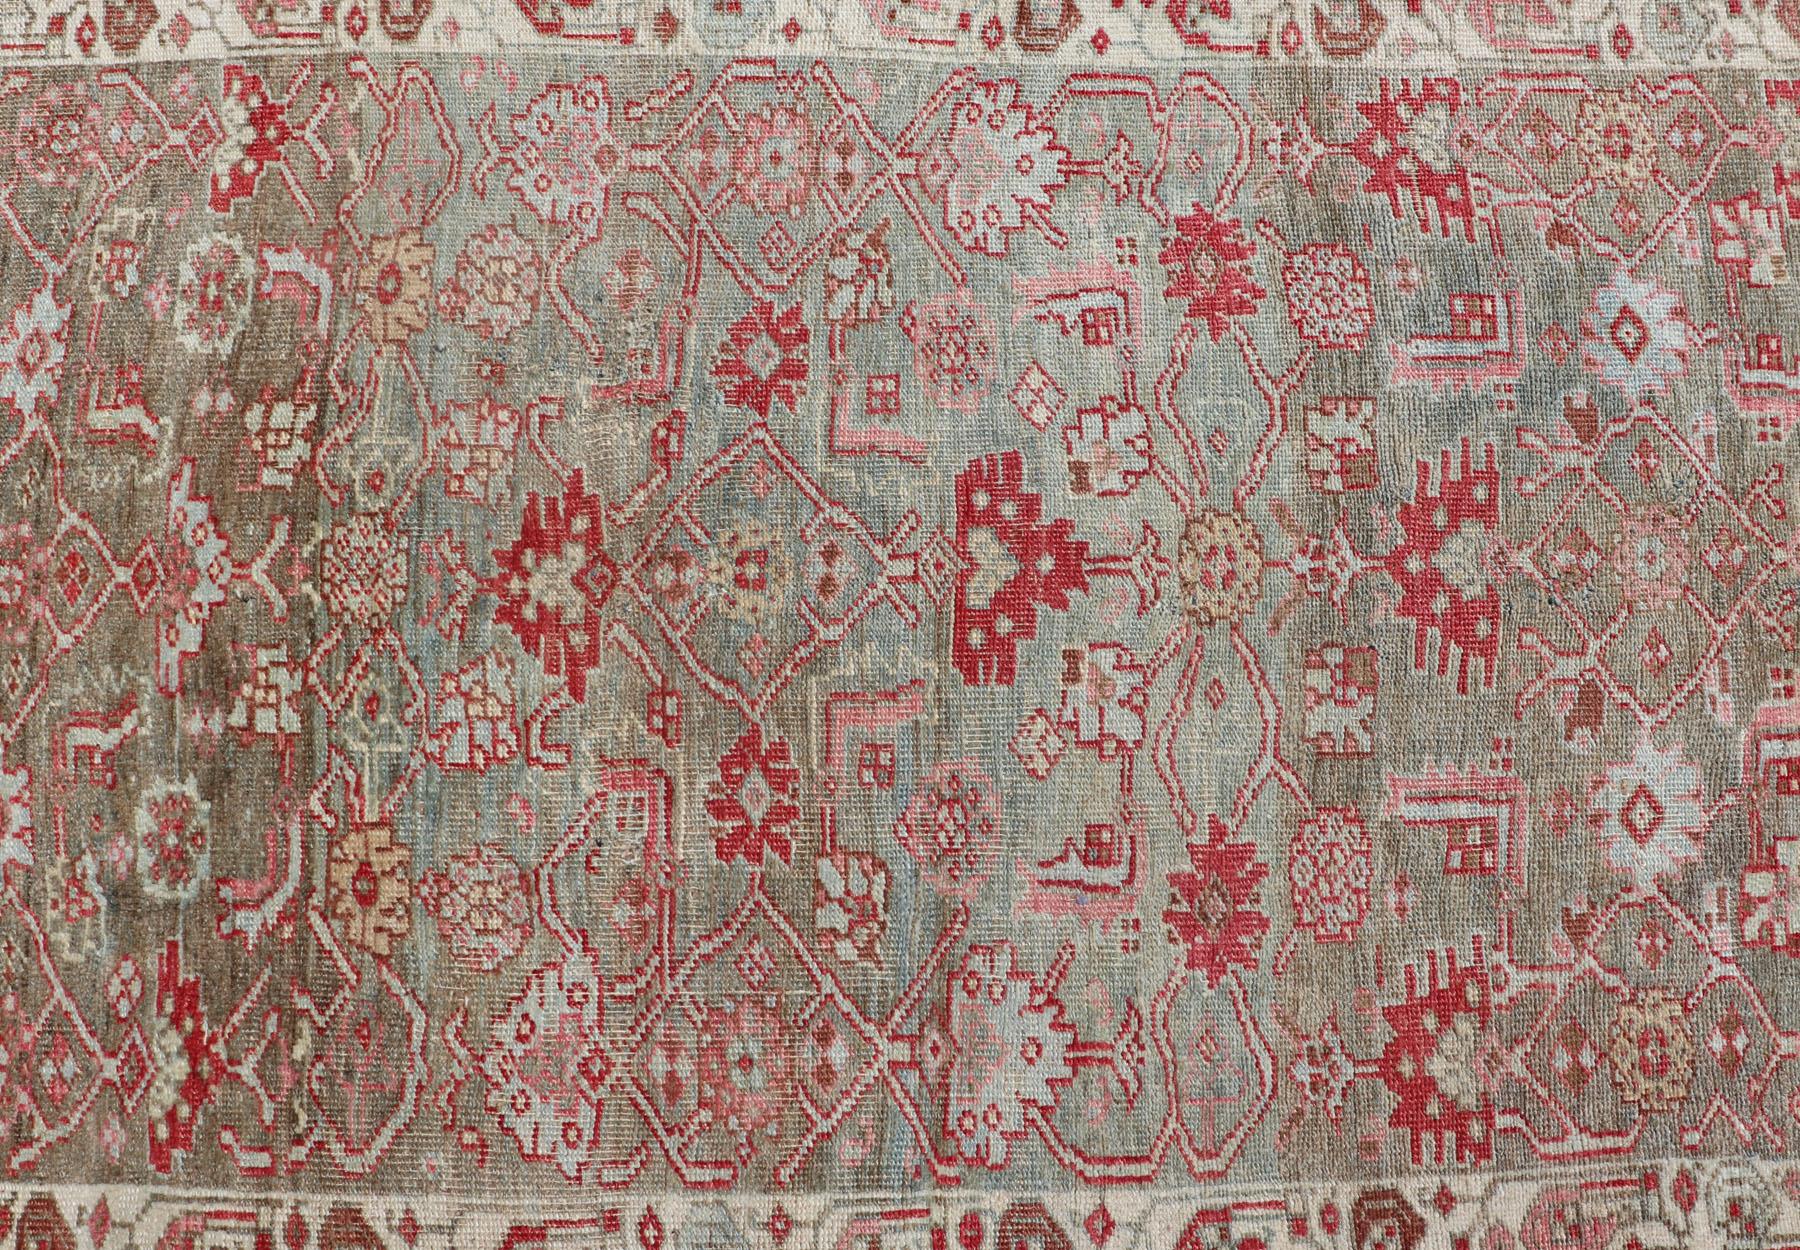 Herati design distressed Bidjar antique Persian rug in a variety of green, taupe green background and soft red border , rug EMB-9542-P13037-05, country of origin / type: Iran / Bidjar, circa 1900

This magnificent Bidjar with an exquisite,